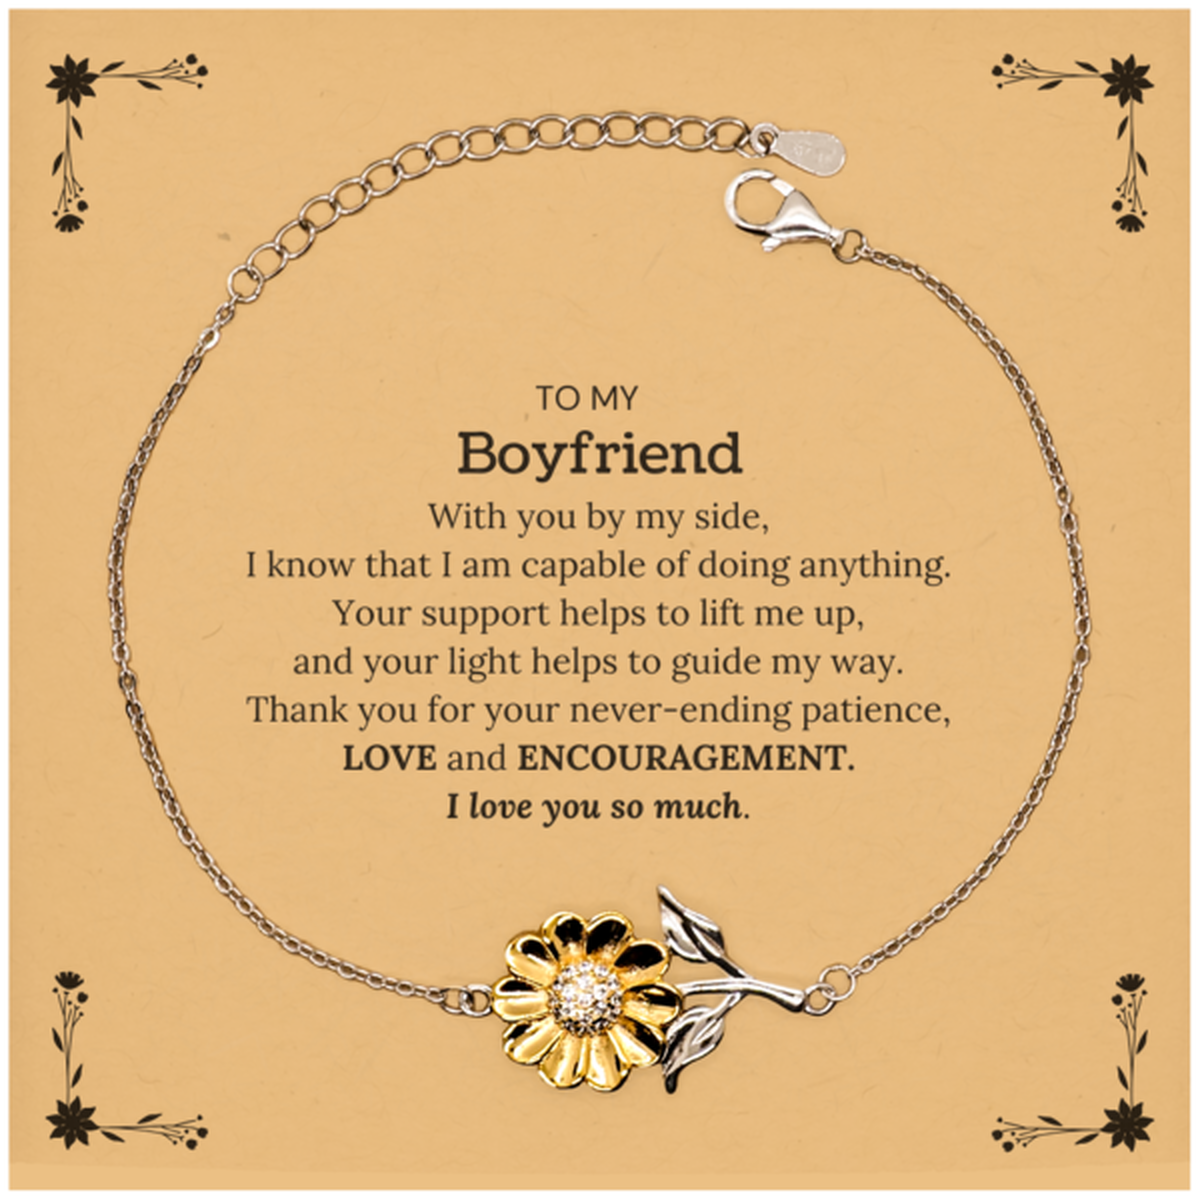 Appreciation Boyfriend Sunflower Bracelet Gifts, To My Boyfriend Birthday Christmas Wedding Keepsake Gifts for Boyfriend With you by my side, I know that I am capable of doing anything. I love you so much